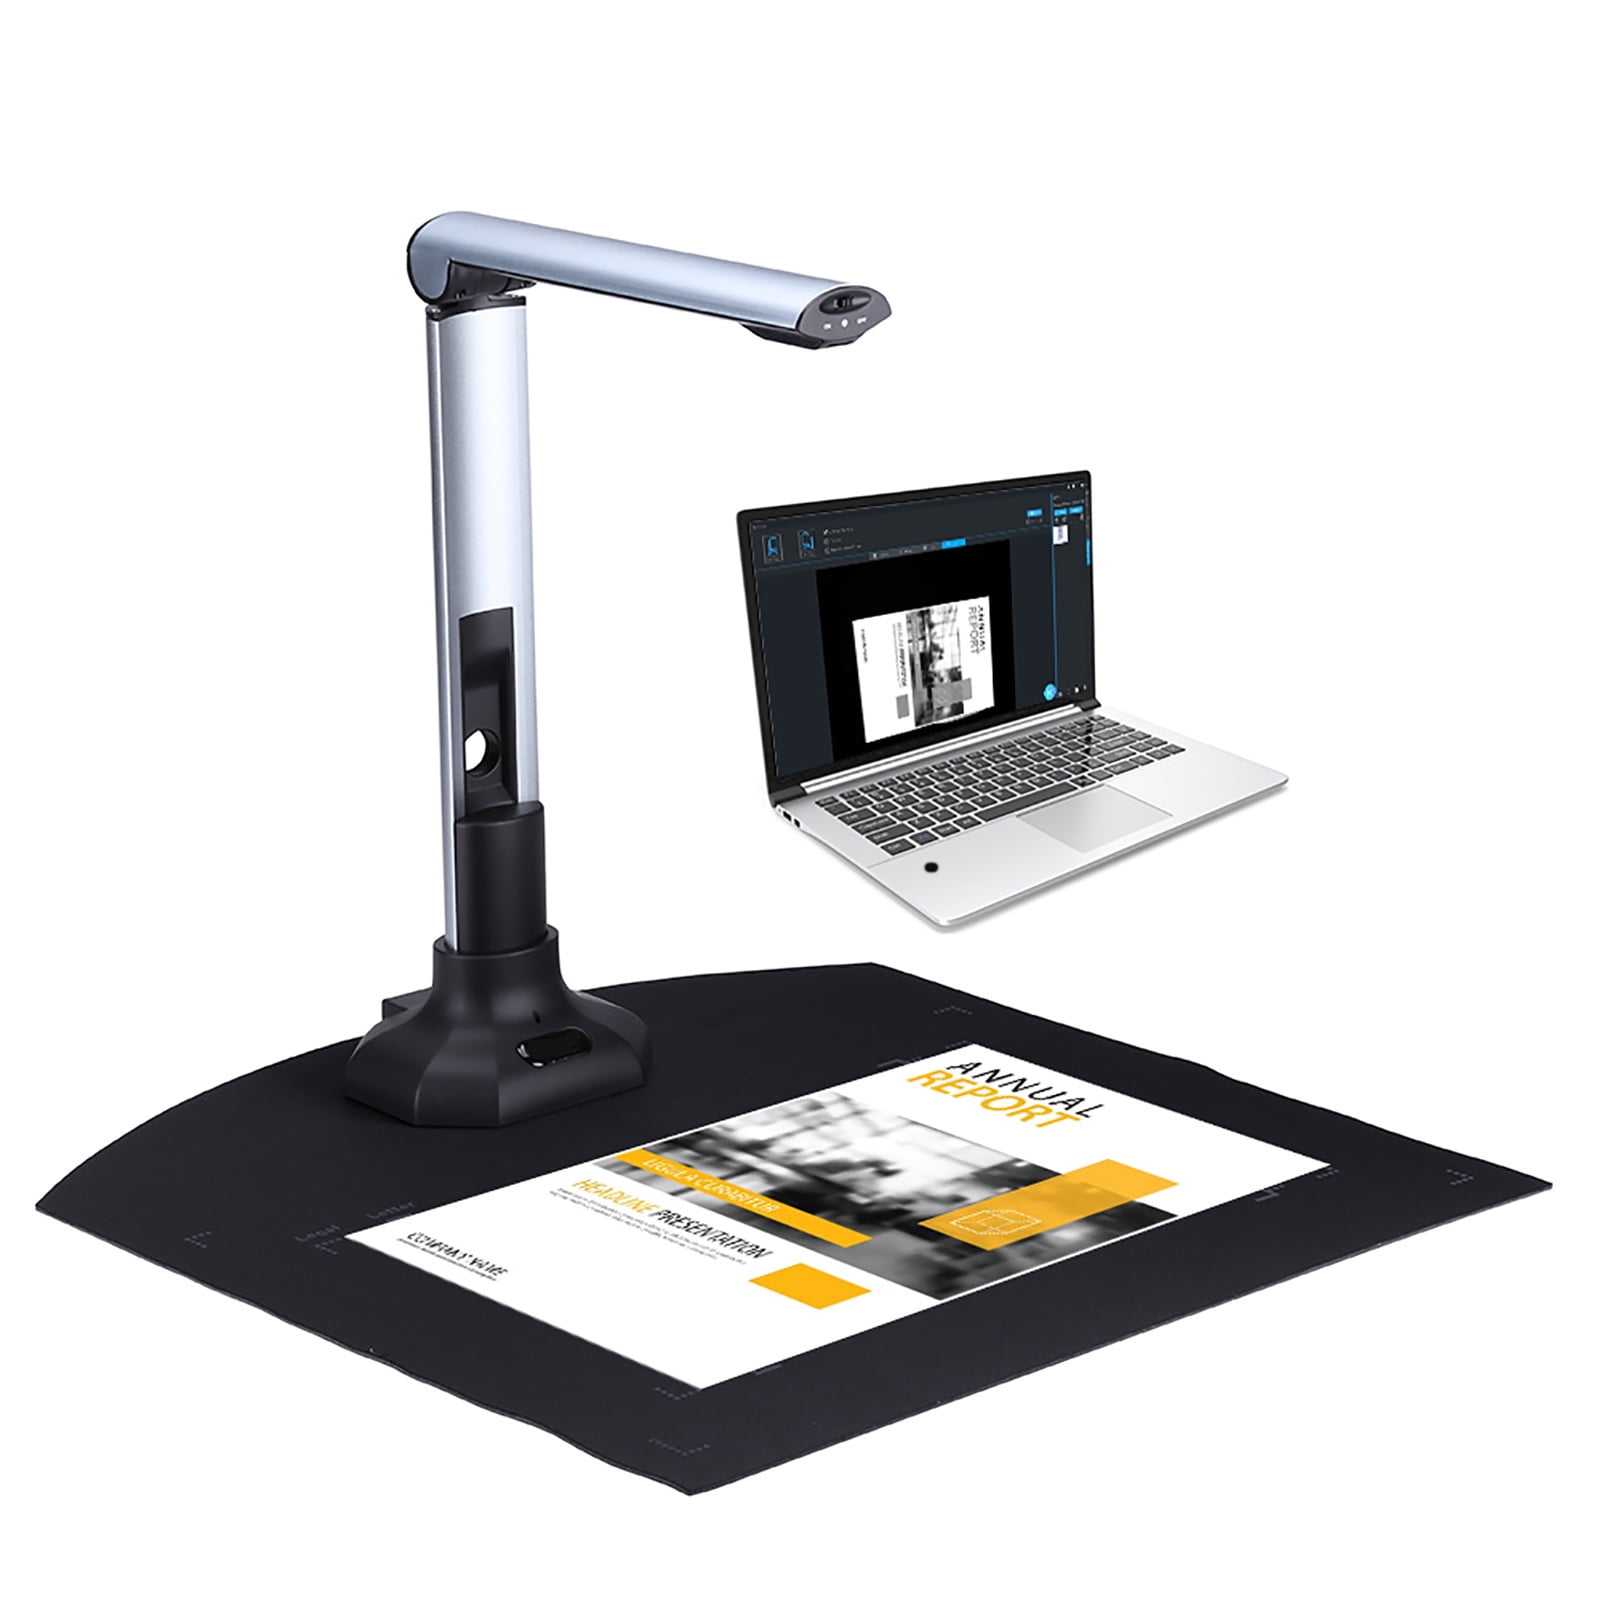 BK52 Portable Book & Document Camera Scanner Capture Size HD 10 -pixels USB 2.0 High Speed with LED for Cards Passport Books Watermarks Setting PDF Export - Walmart.com